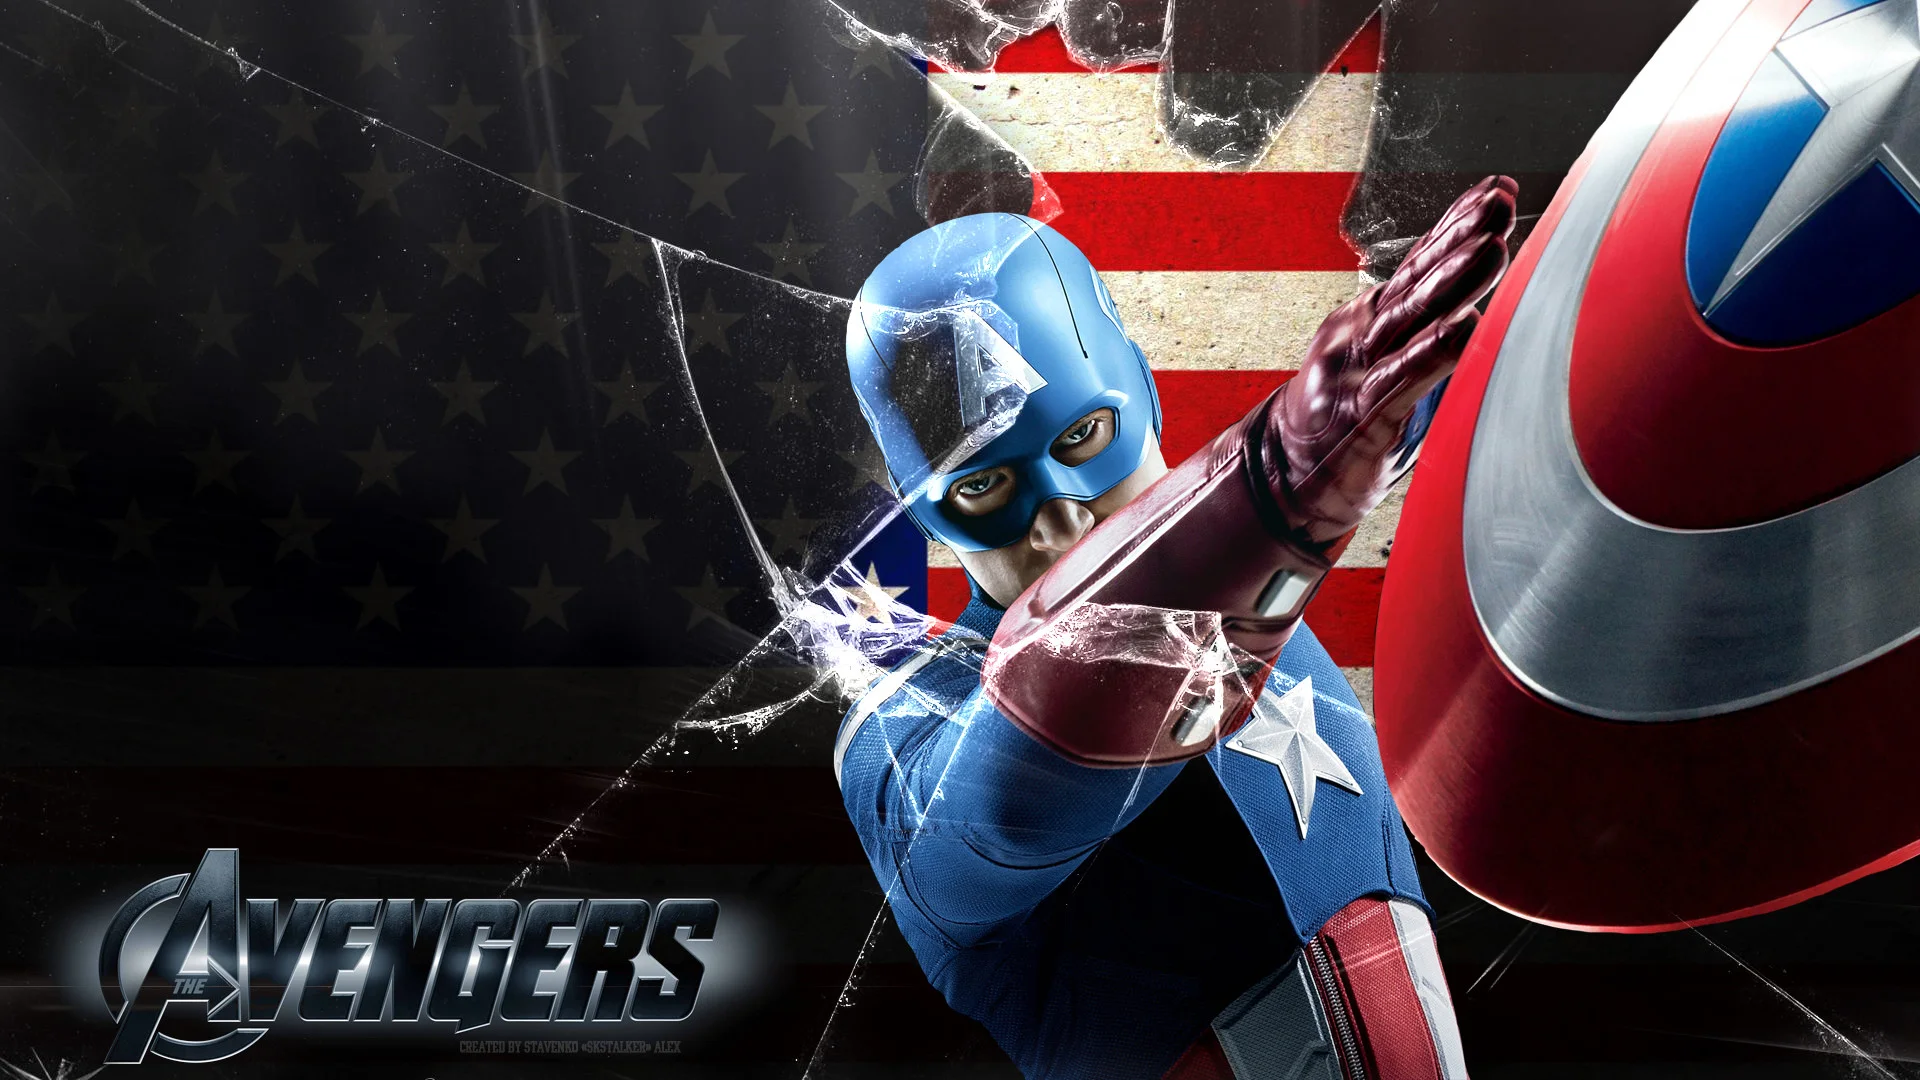 Captain America Avengers Wallpapers For Iphone On Wallpaper Hd 1920 x 1080 px 623.08 KB shield